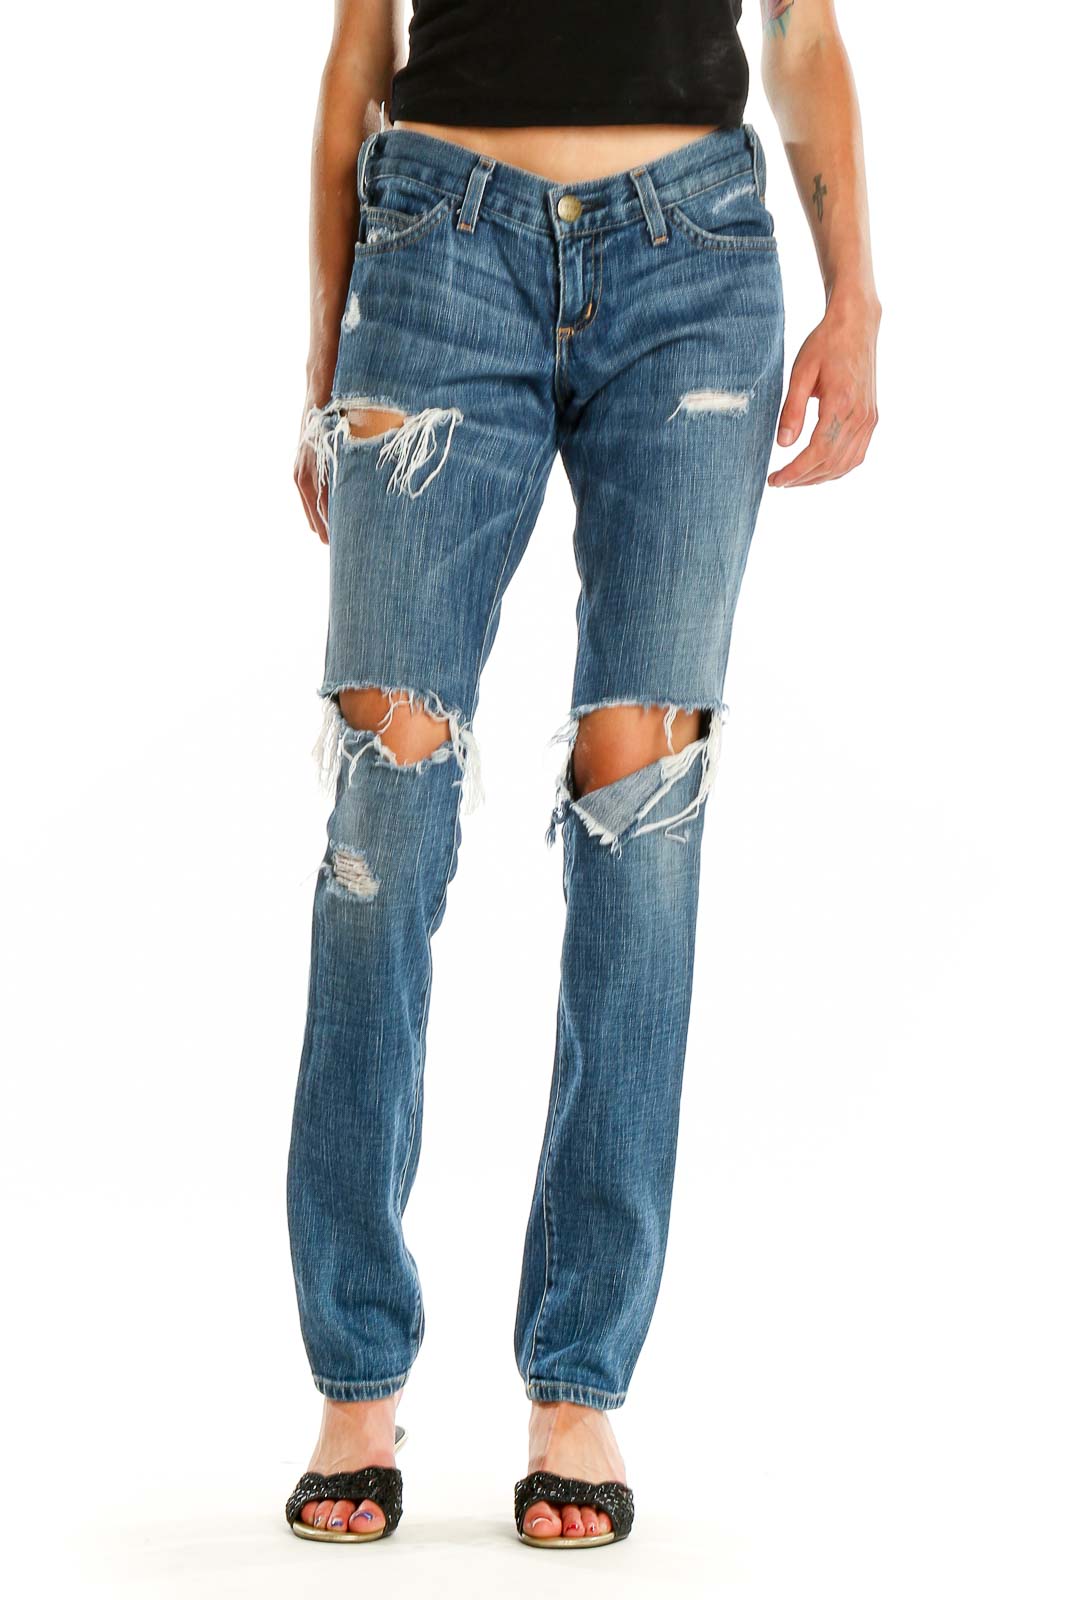 Blue Distressed Jeans Front